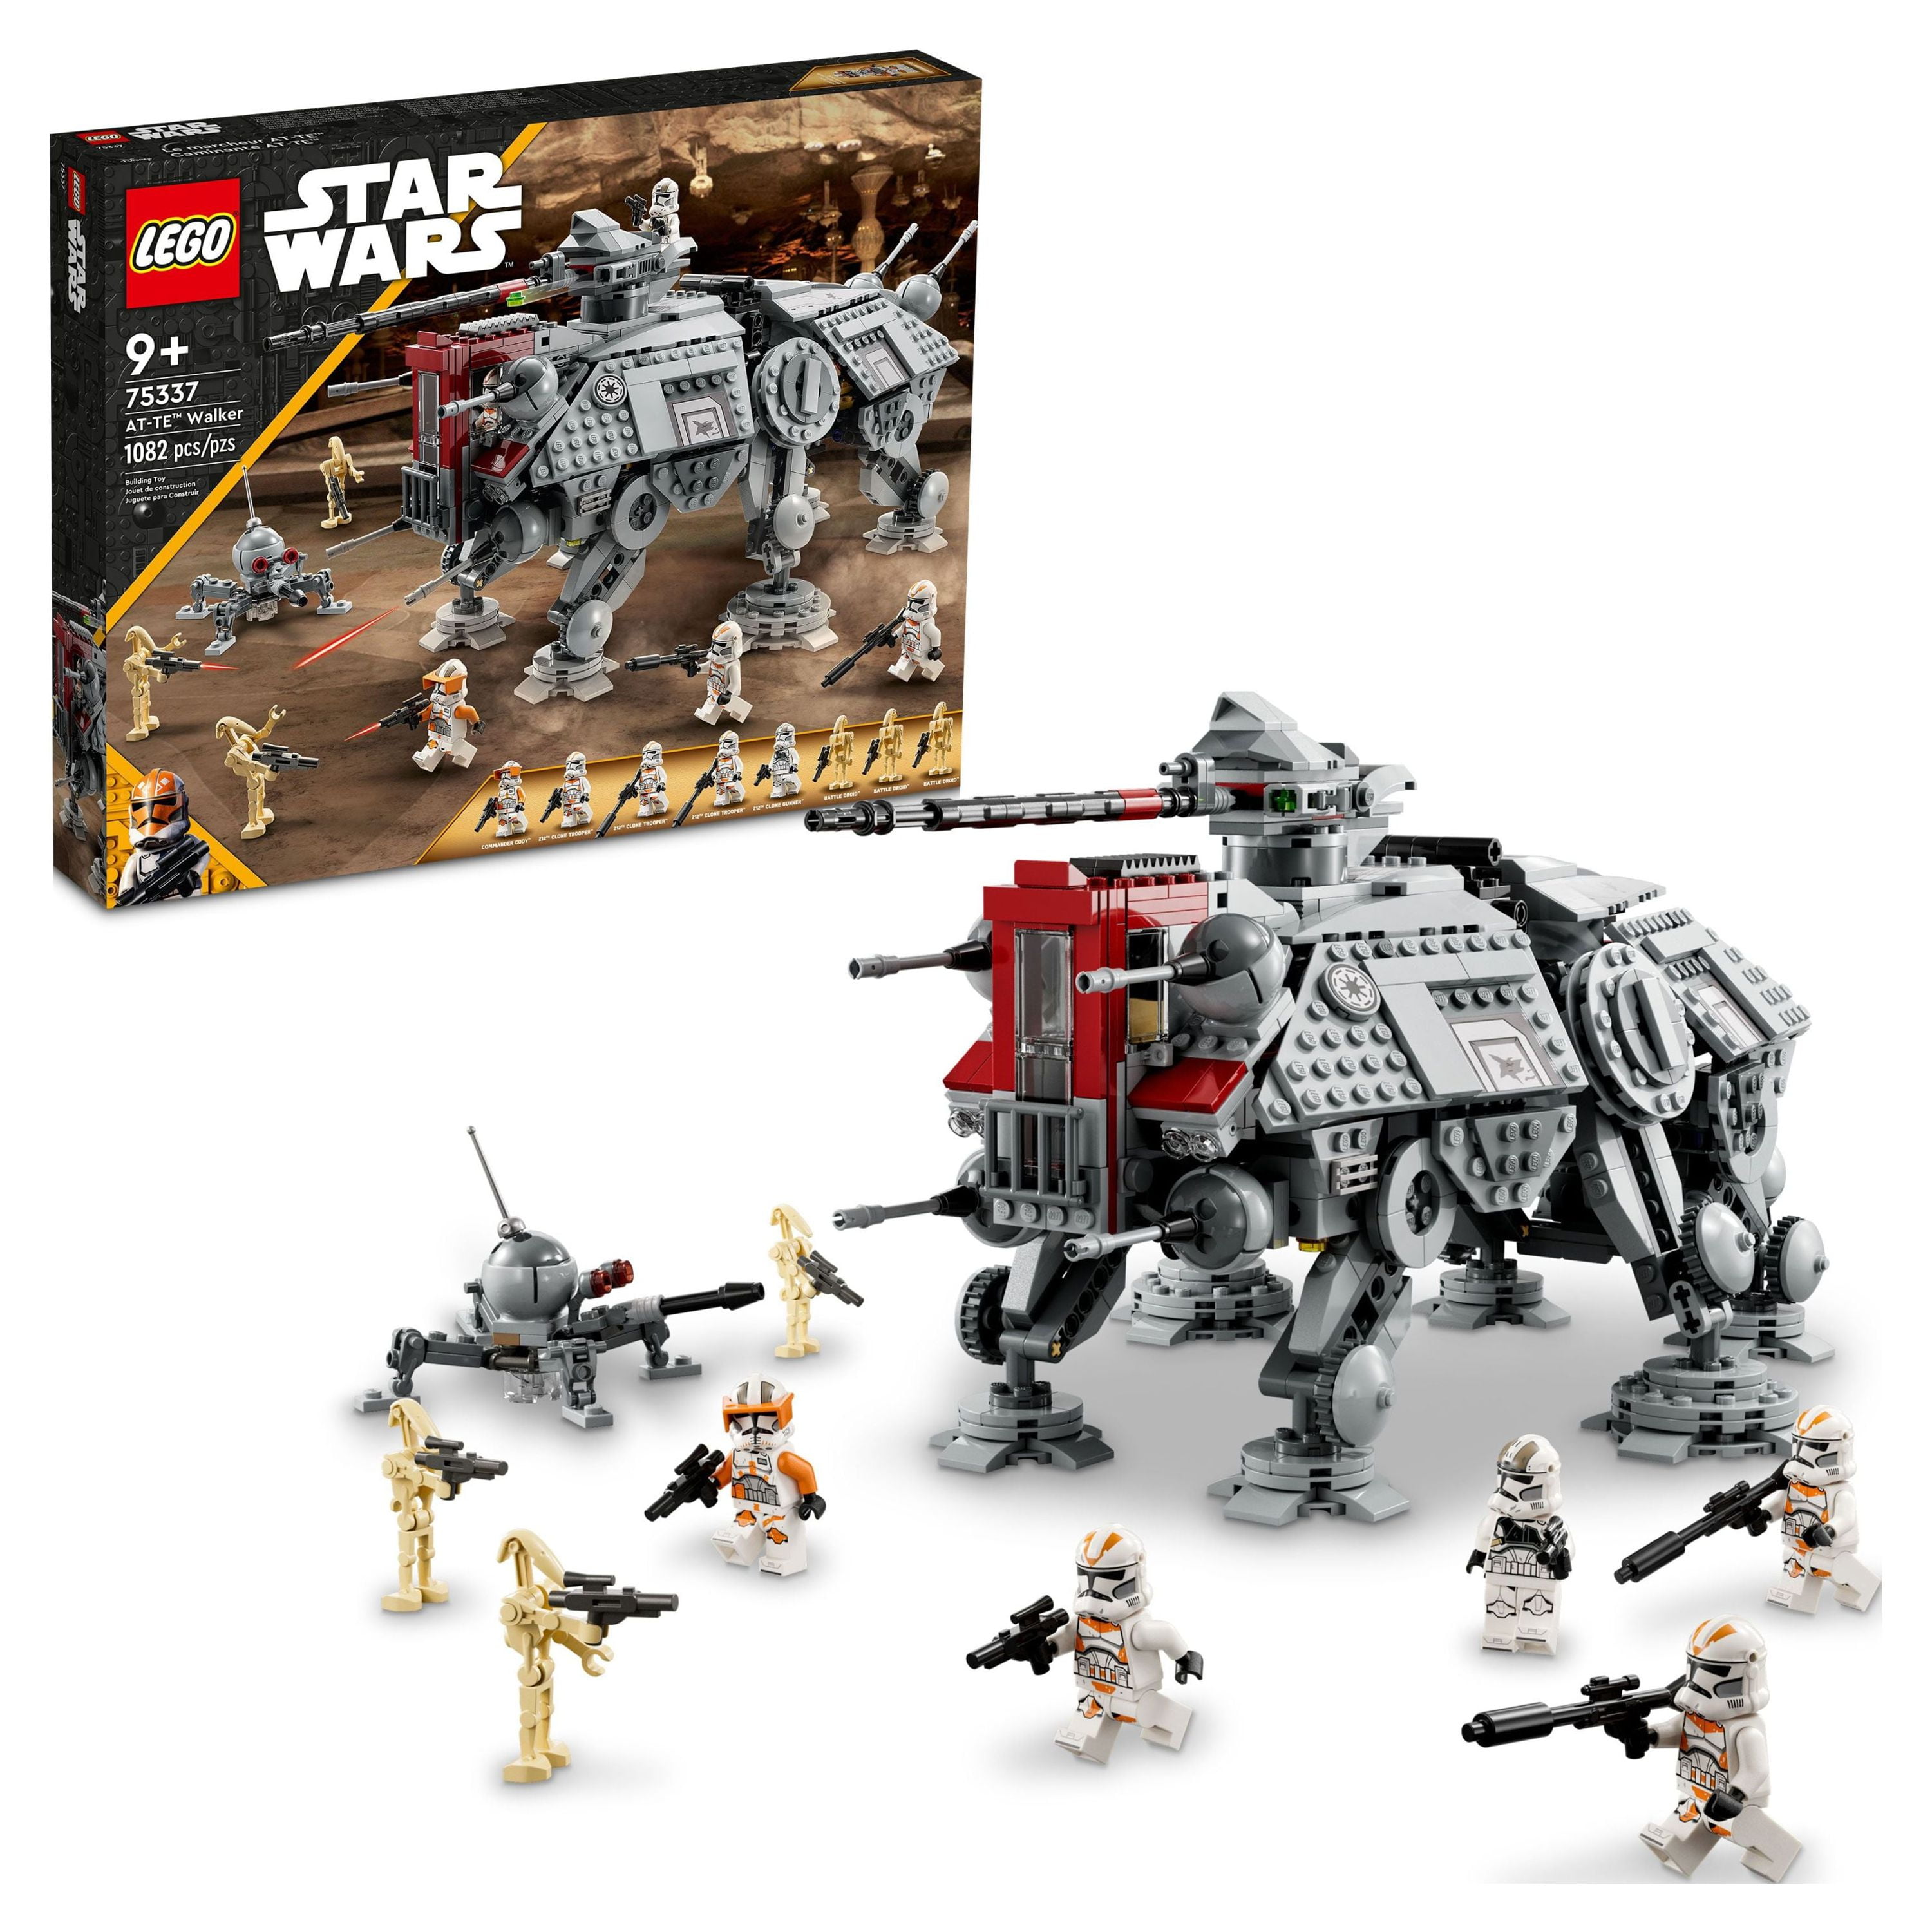 LEGO Star Wars: The Last Jedi A-Wing vs. TIE Silencer Microfighters 75196  Building Kit (188 Pieces) (Discontinued by Manufacturer)